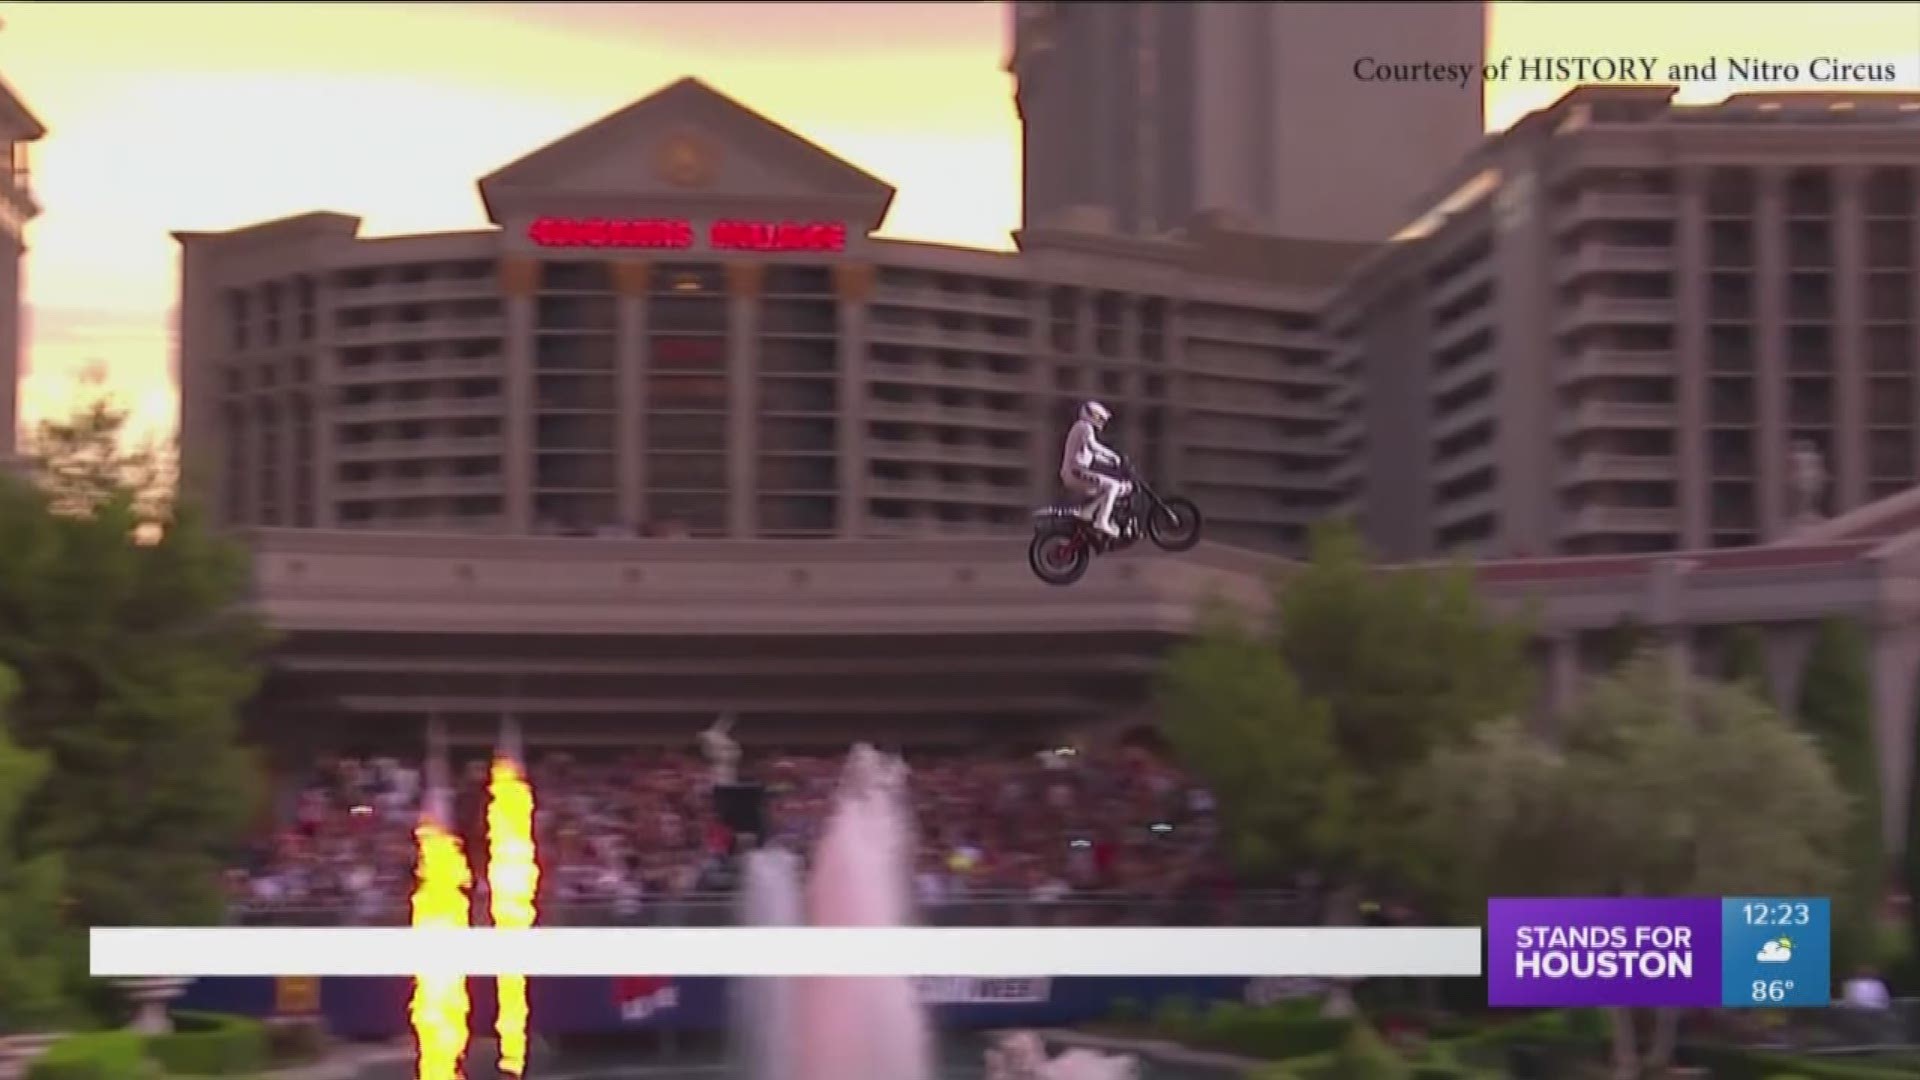 Thousands gathered in Las Vegas to watch stunt performer Travis Pastrana take on three different jumps, where he broke records on two of them.